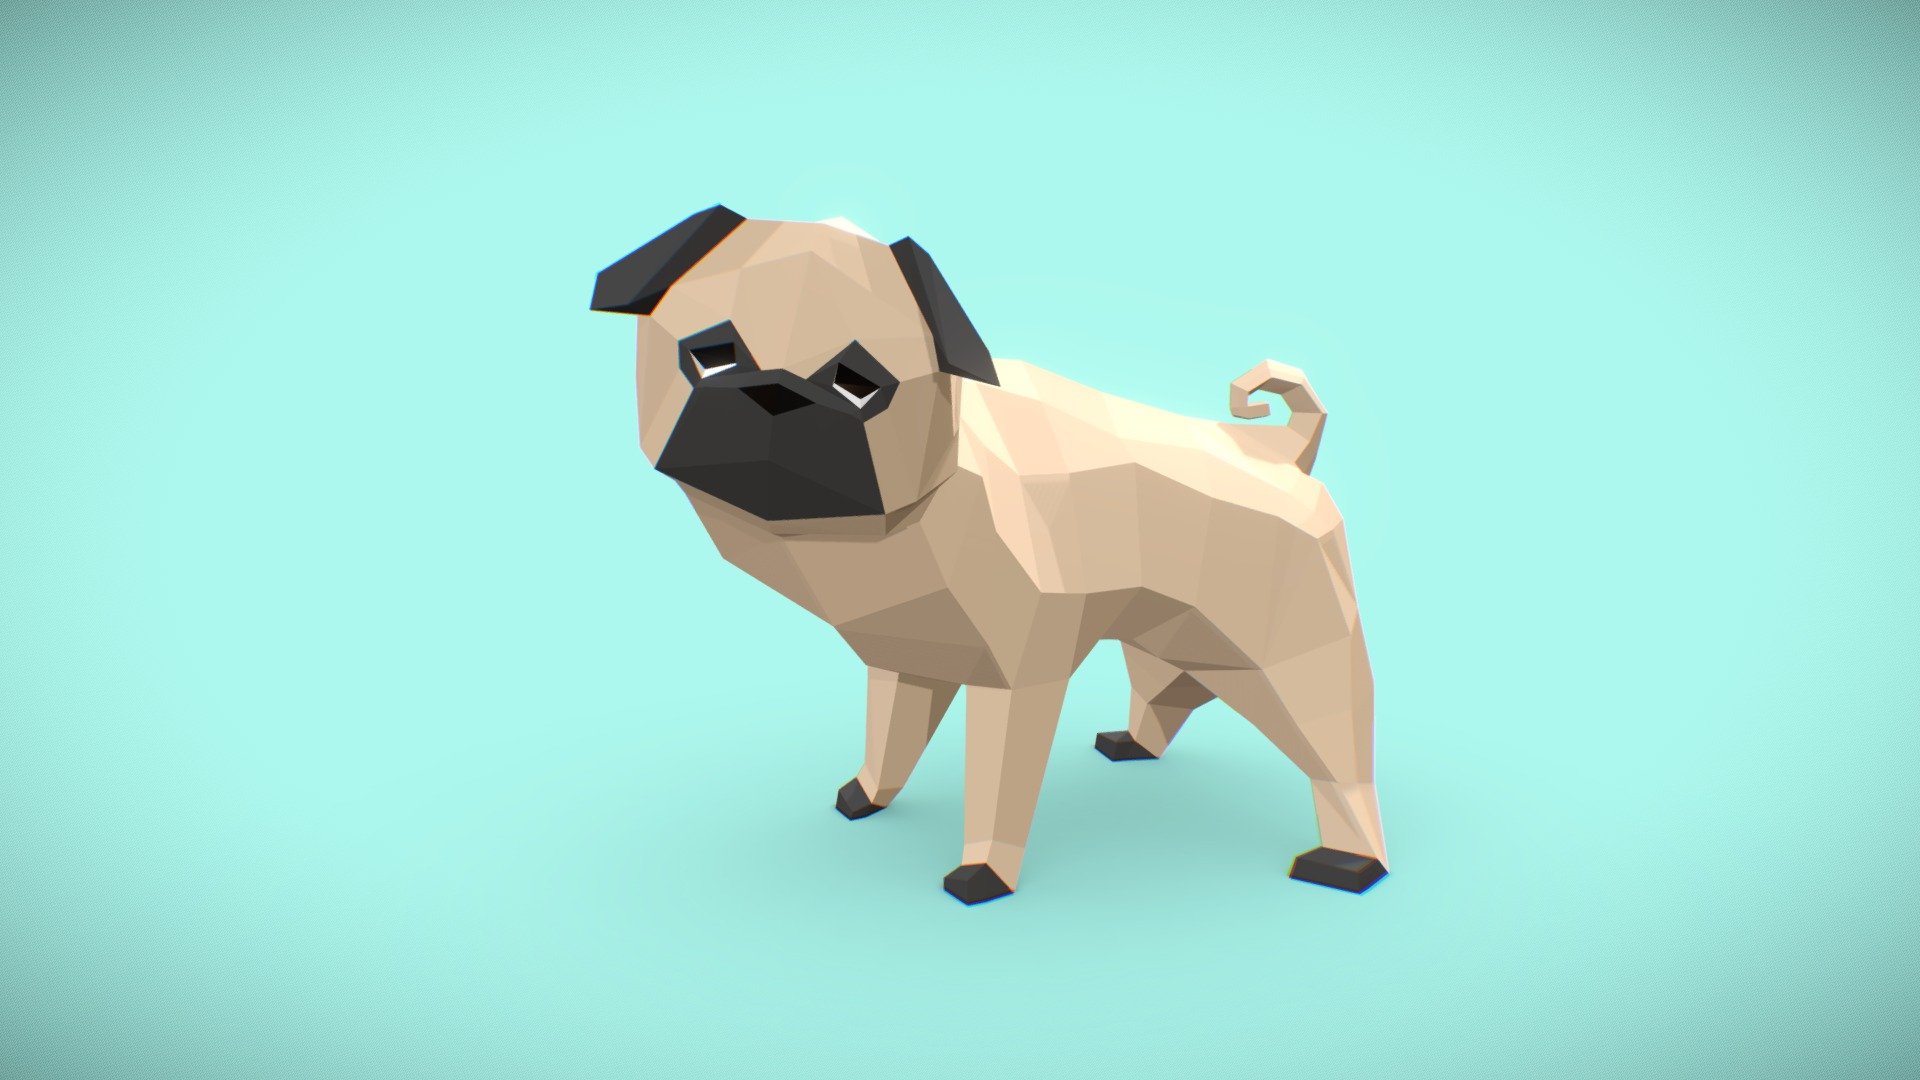 Super Low Poly Pug comission for Papercraft. The challenge was to get a good shape and still look cute 3d model